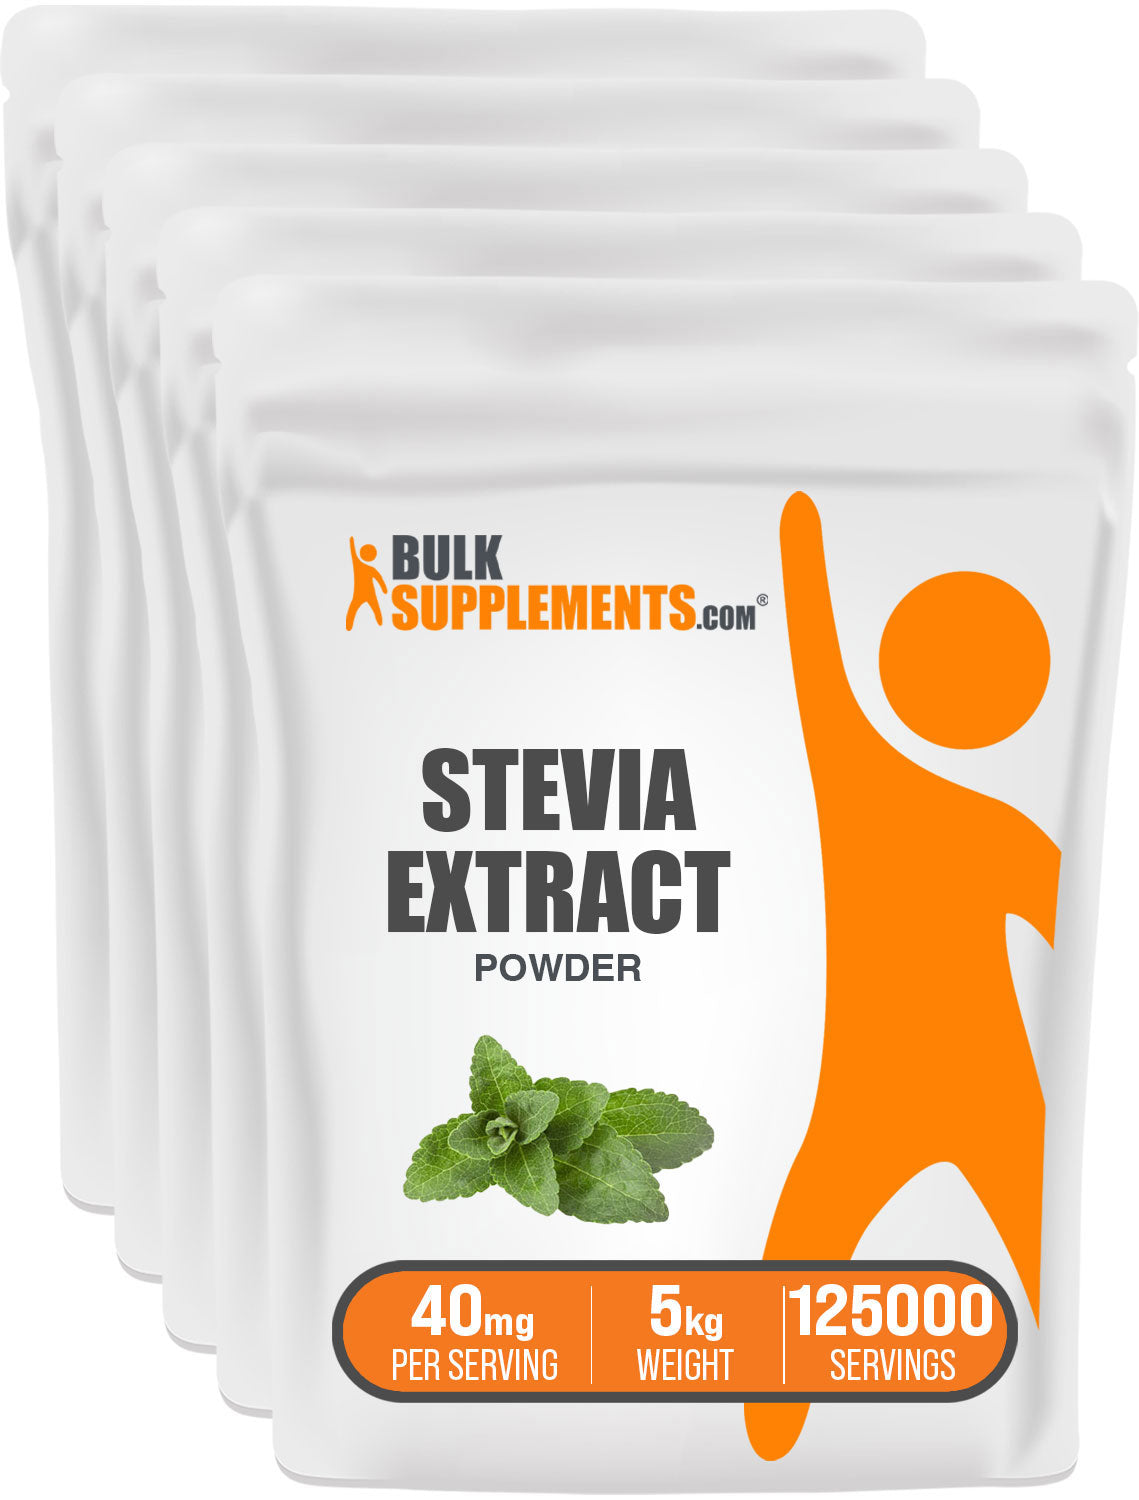 Stevia Extract Powder 5kg bags